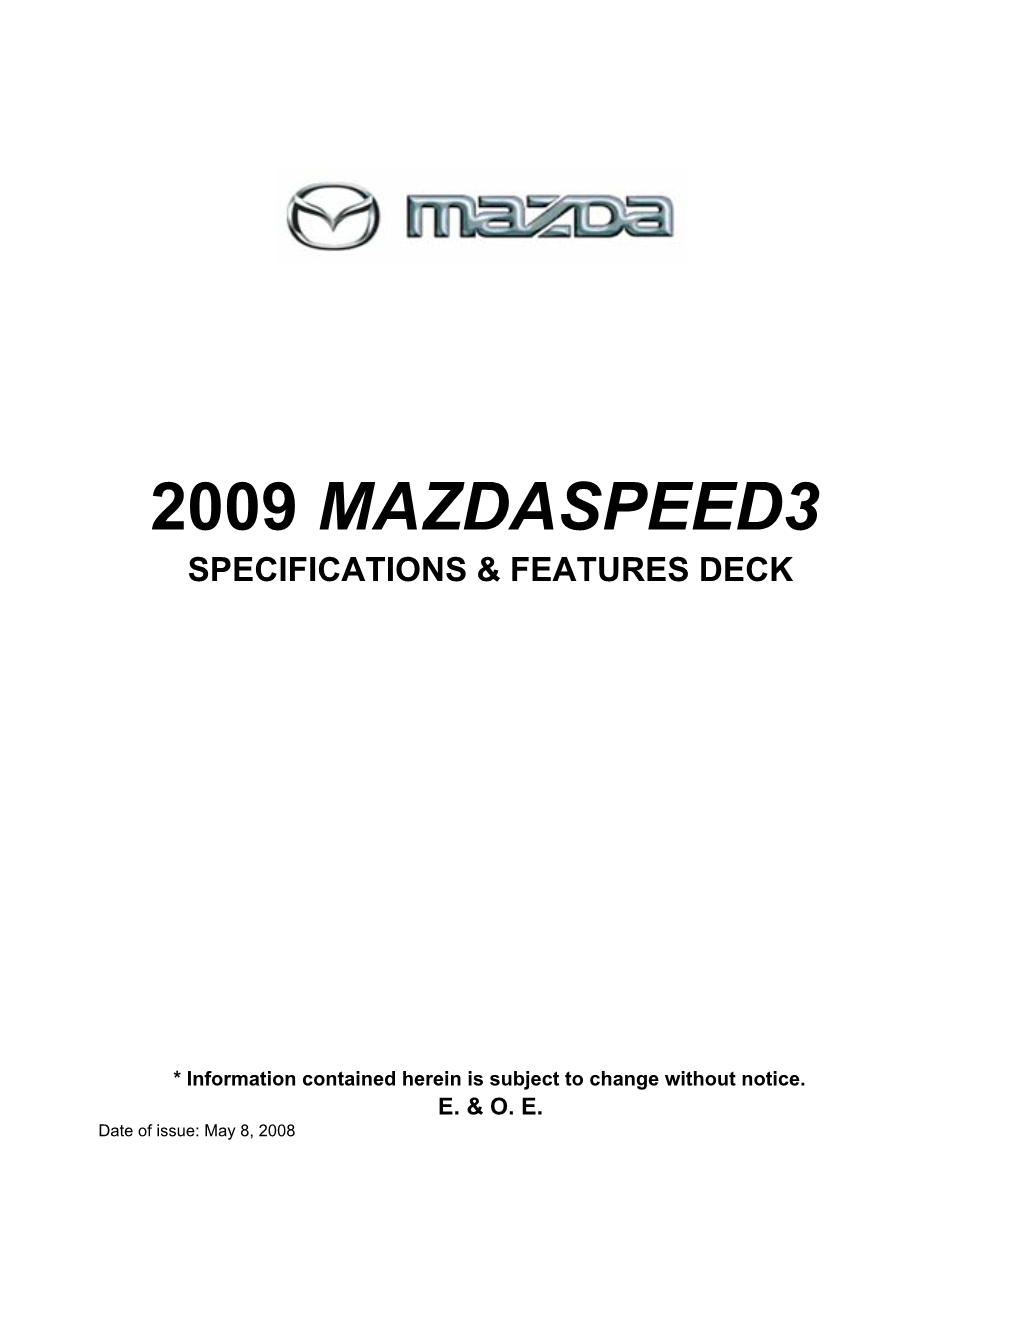 2009 MAZDASPEED3 Specifications and Features